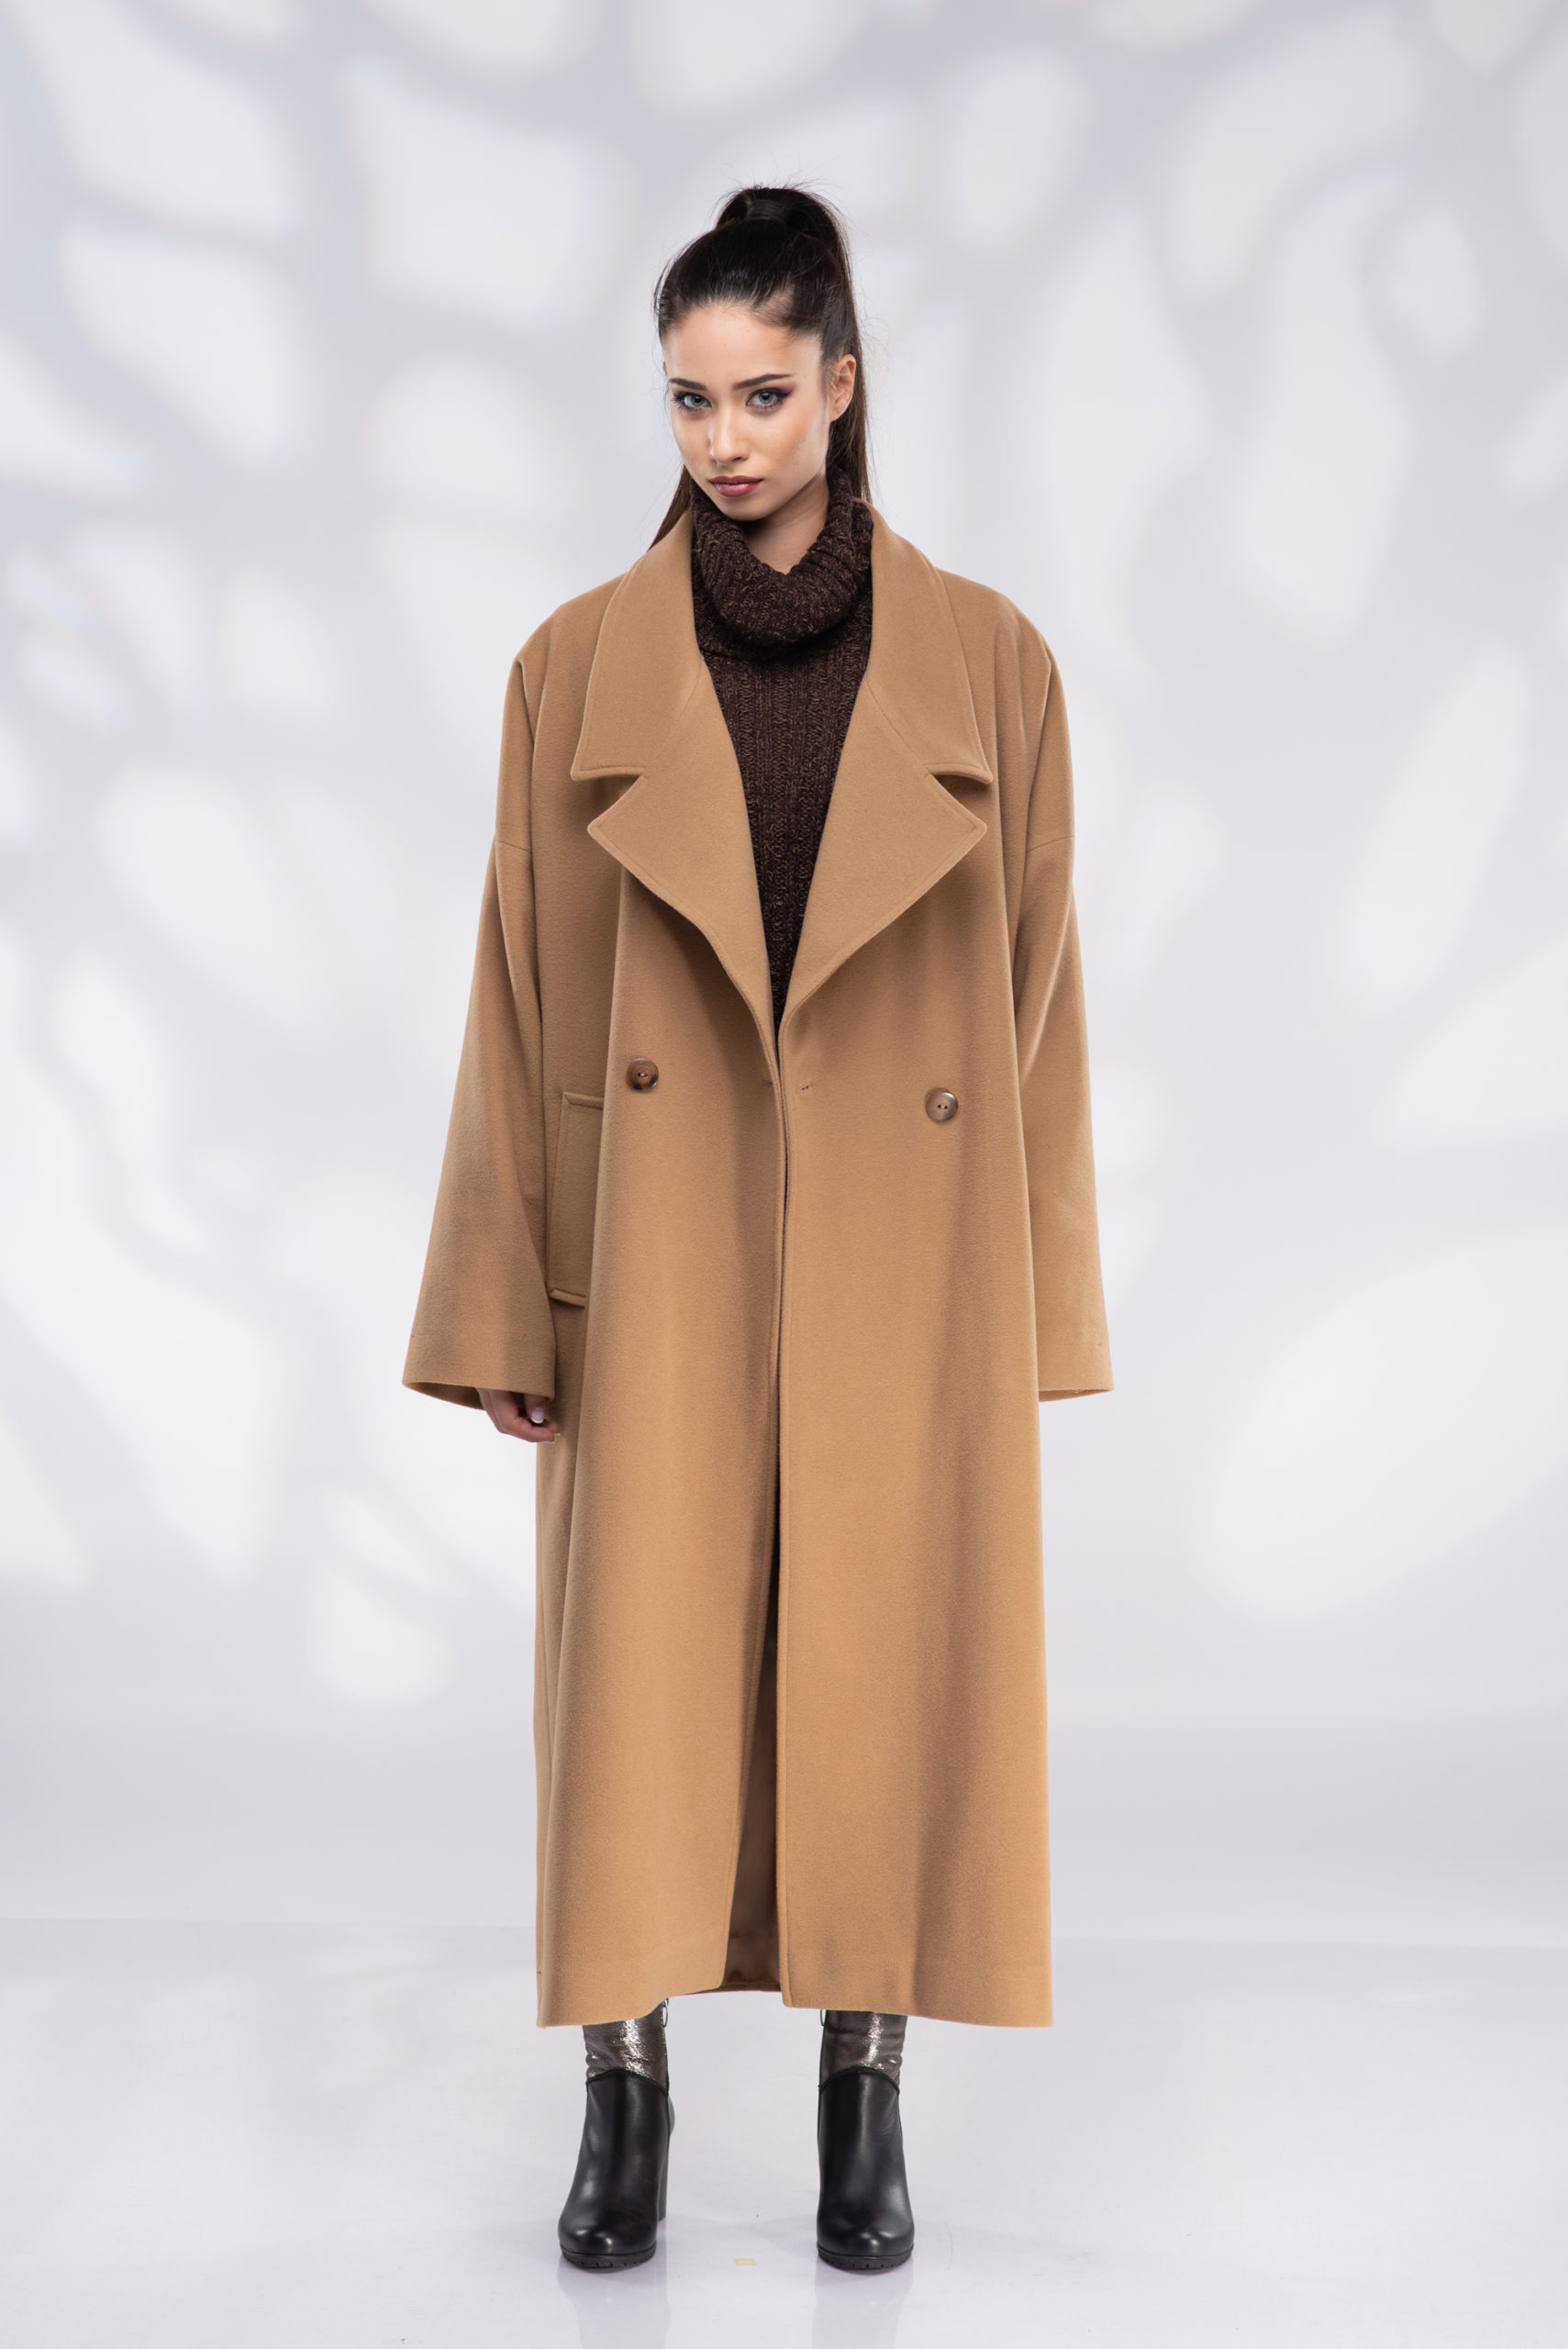 Double Breasted Long Wool Coat For Women Autumn Winter Ladies Long